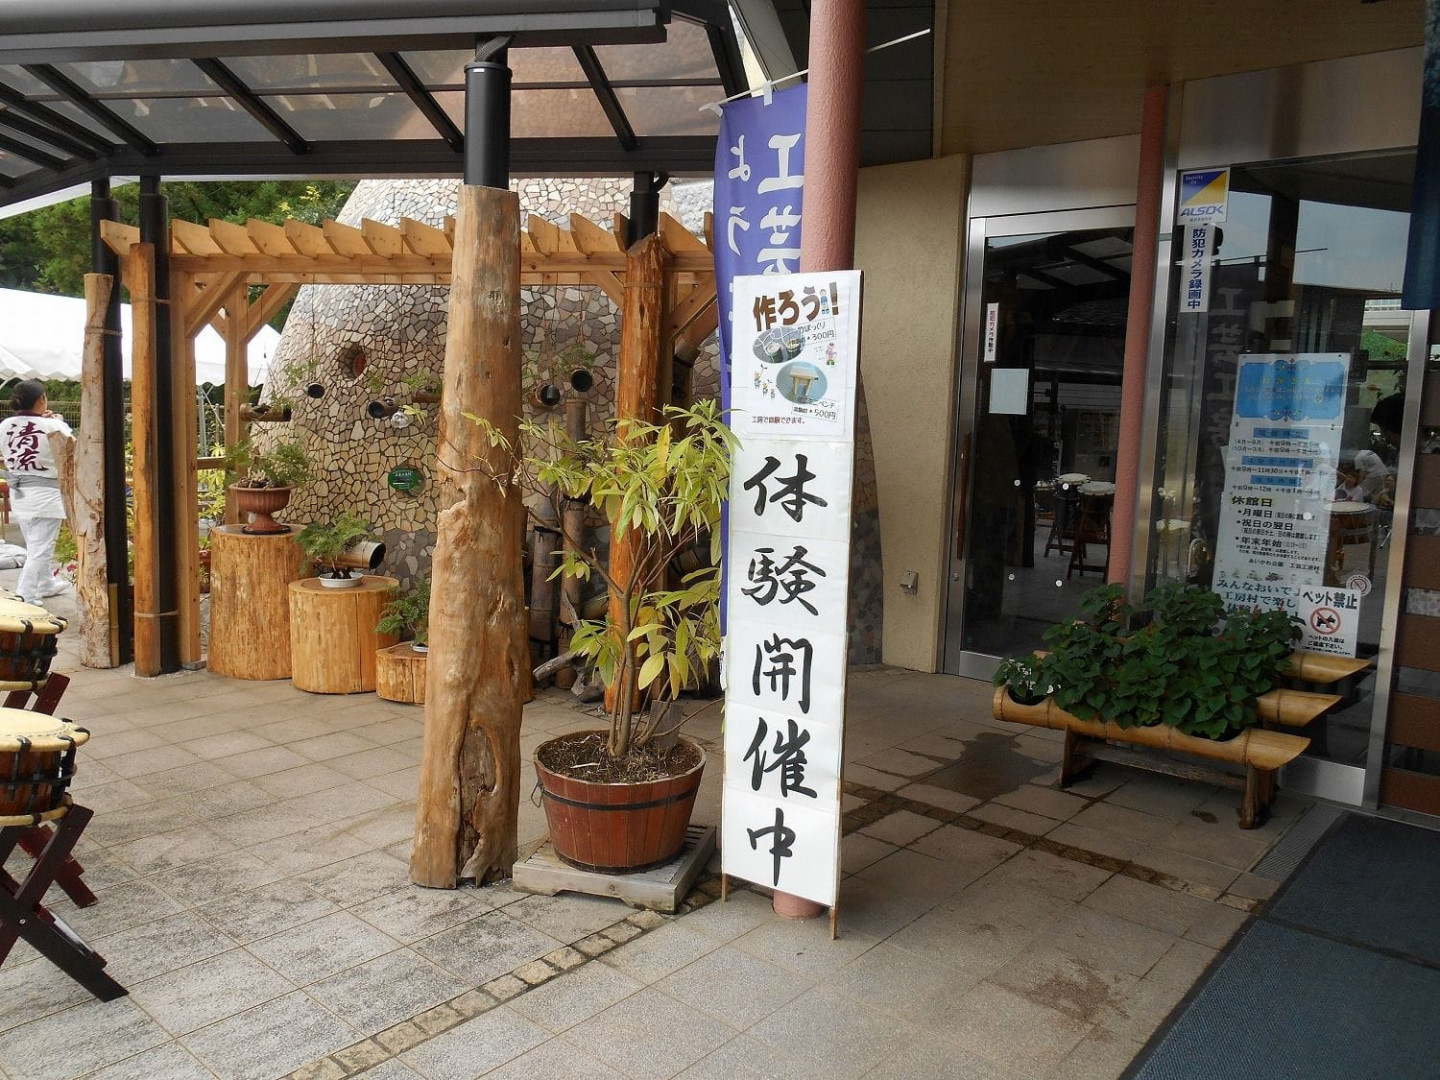 The entrance to the Kogei Kobo Mura. The sign says `We are holding Workshops and Hands-on Experiences!`